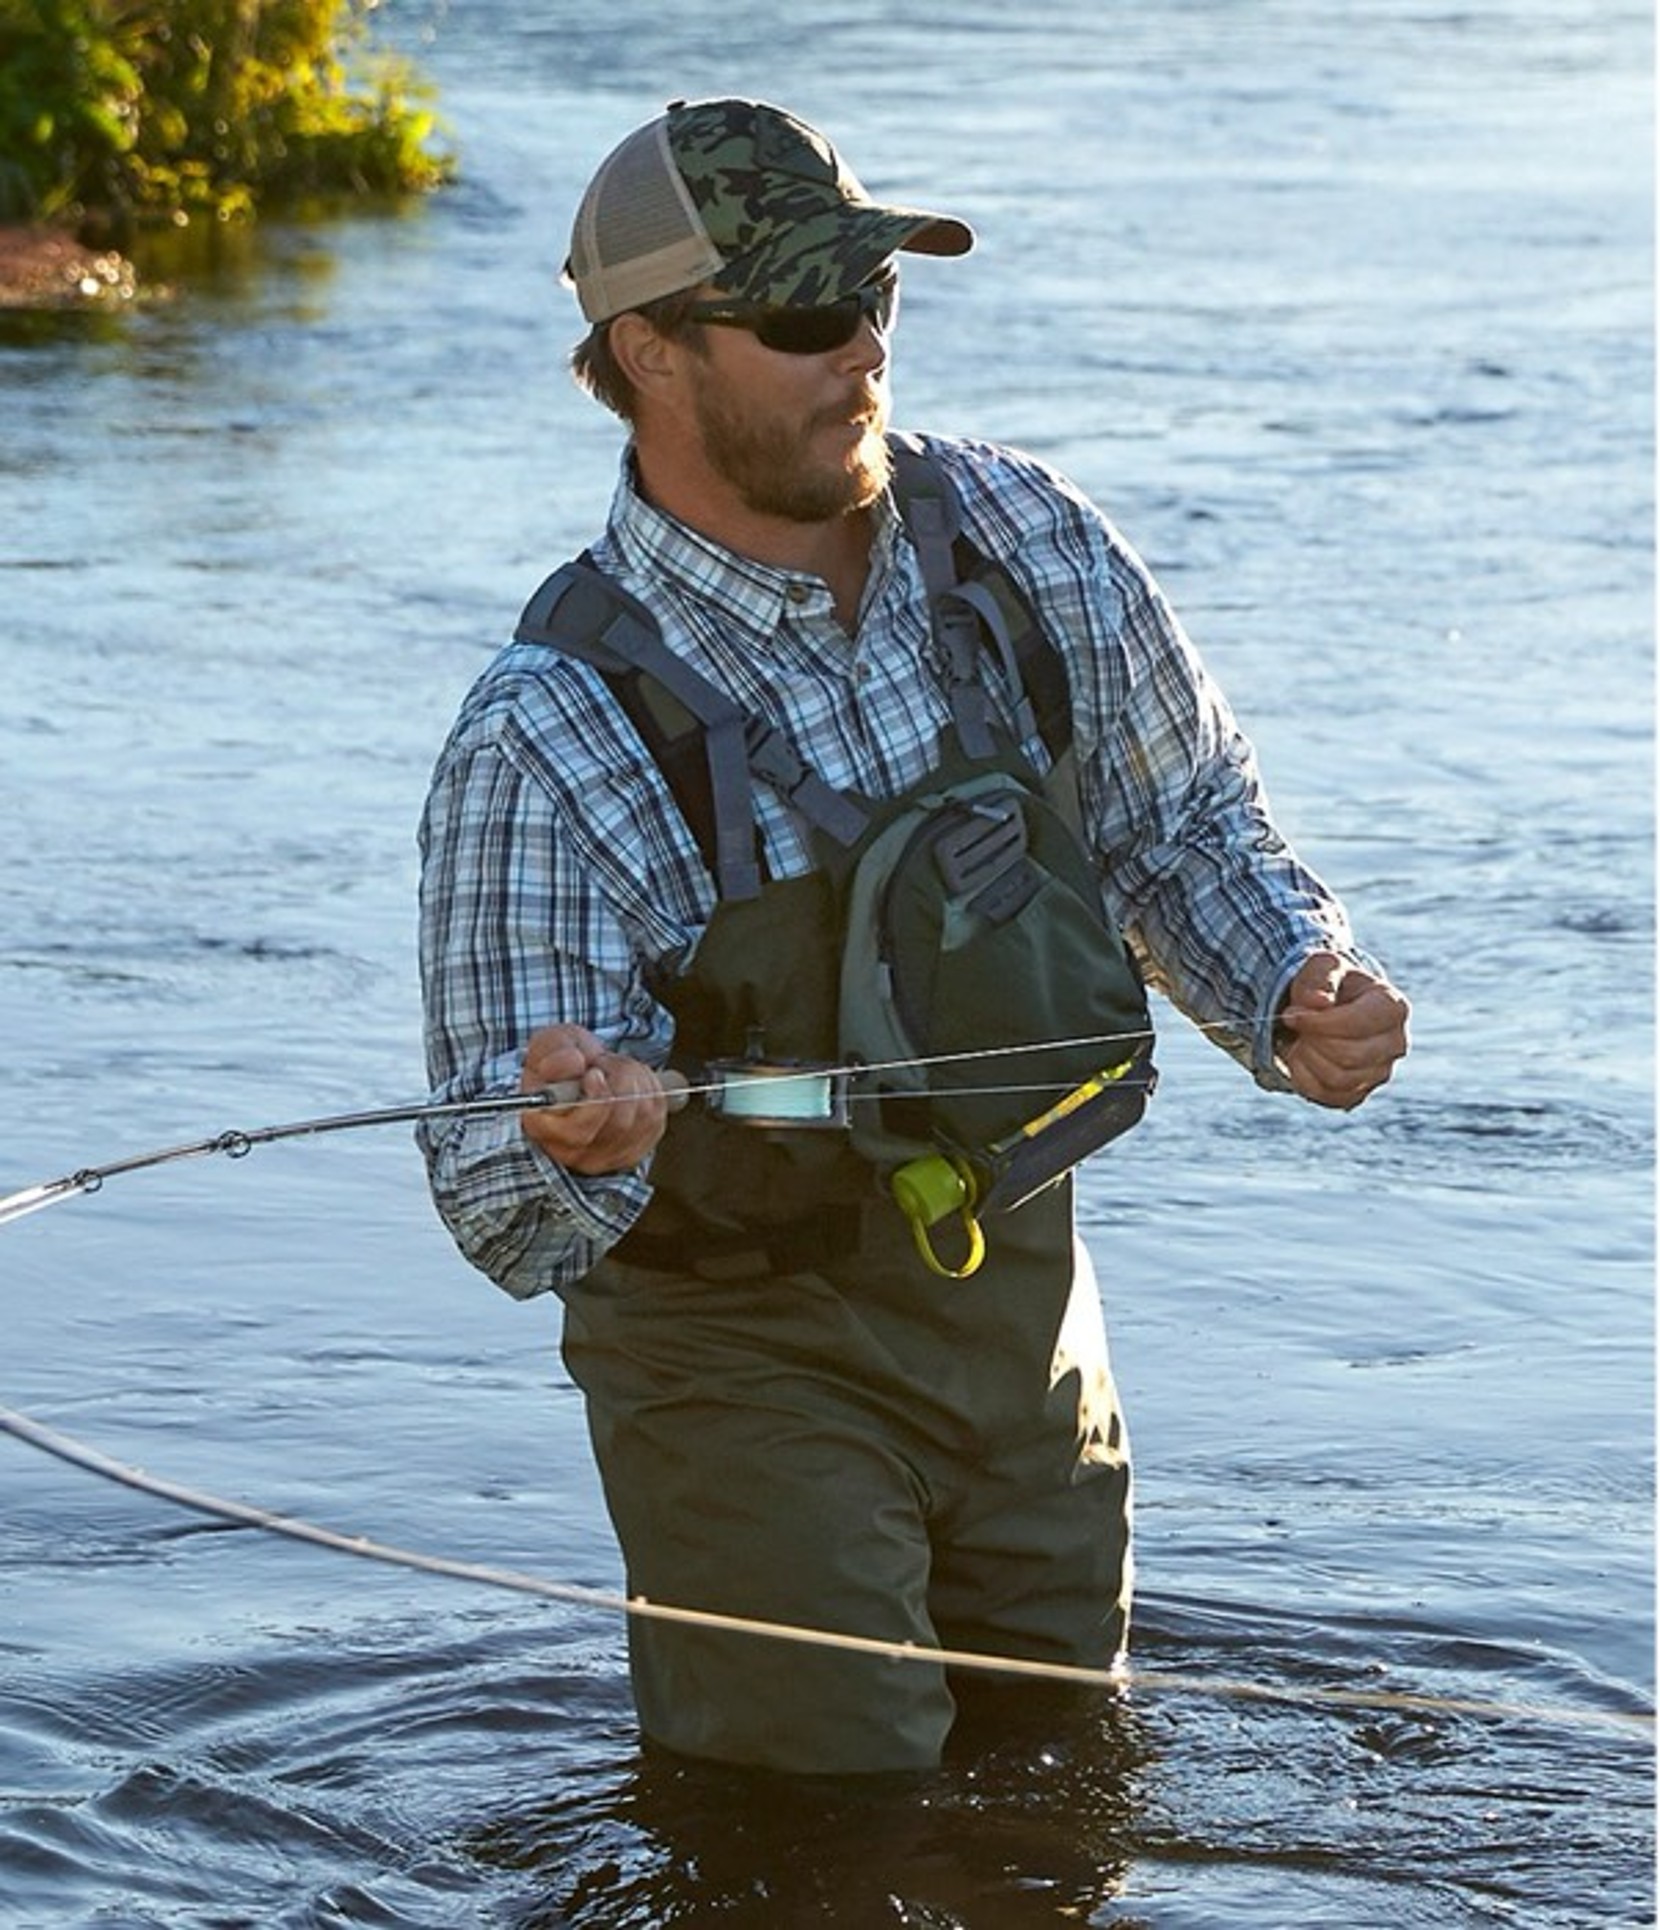 A man in waders fly fishing in a stream